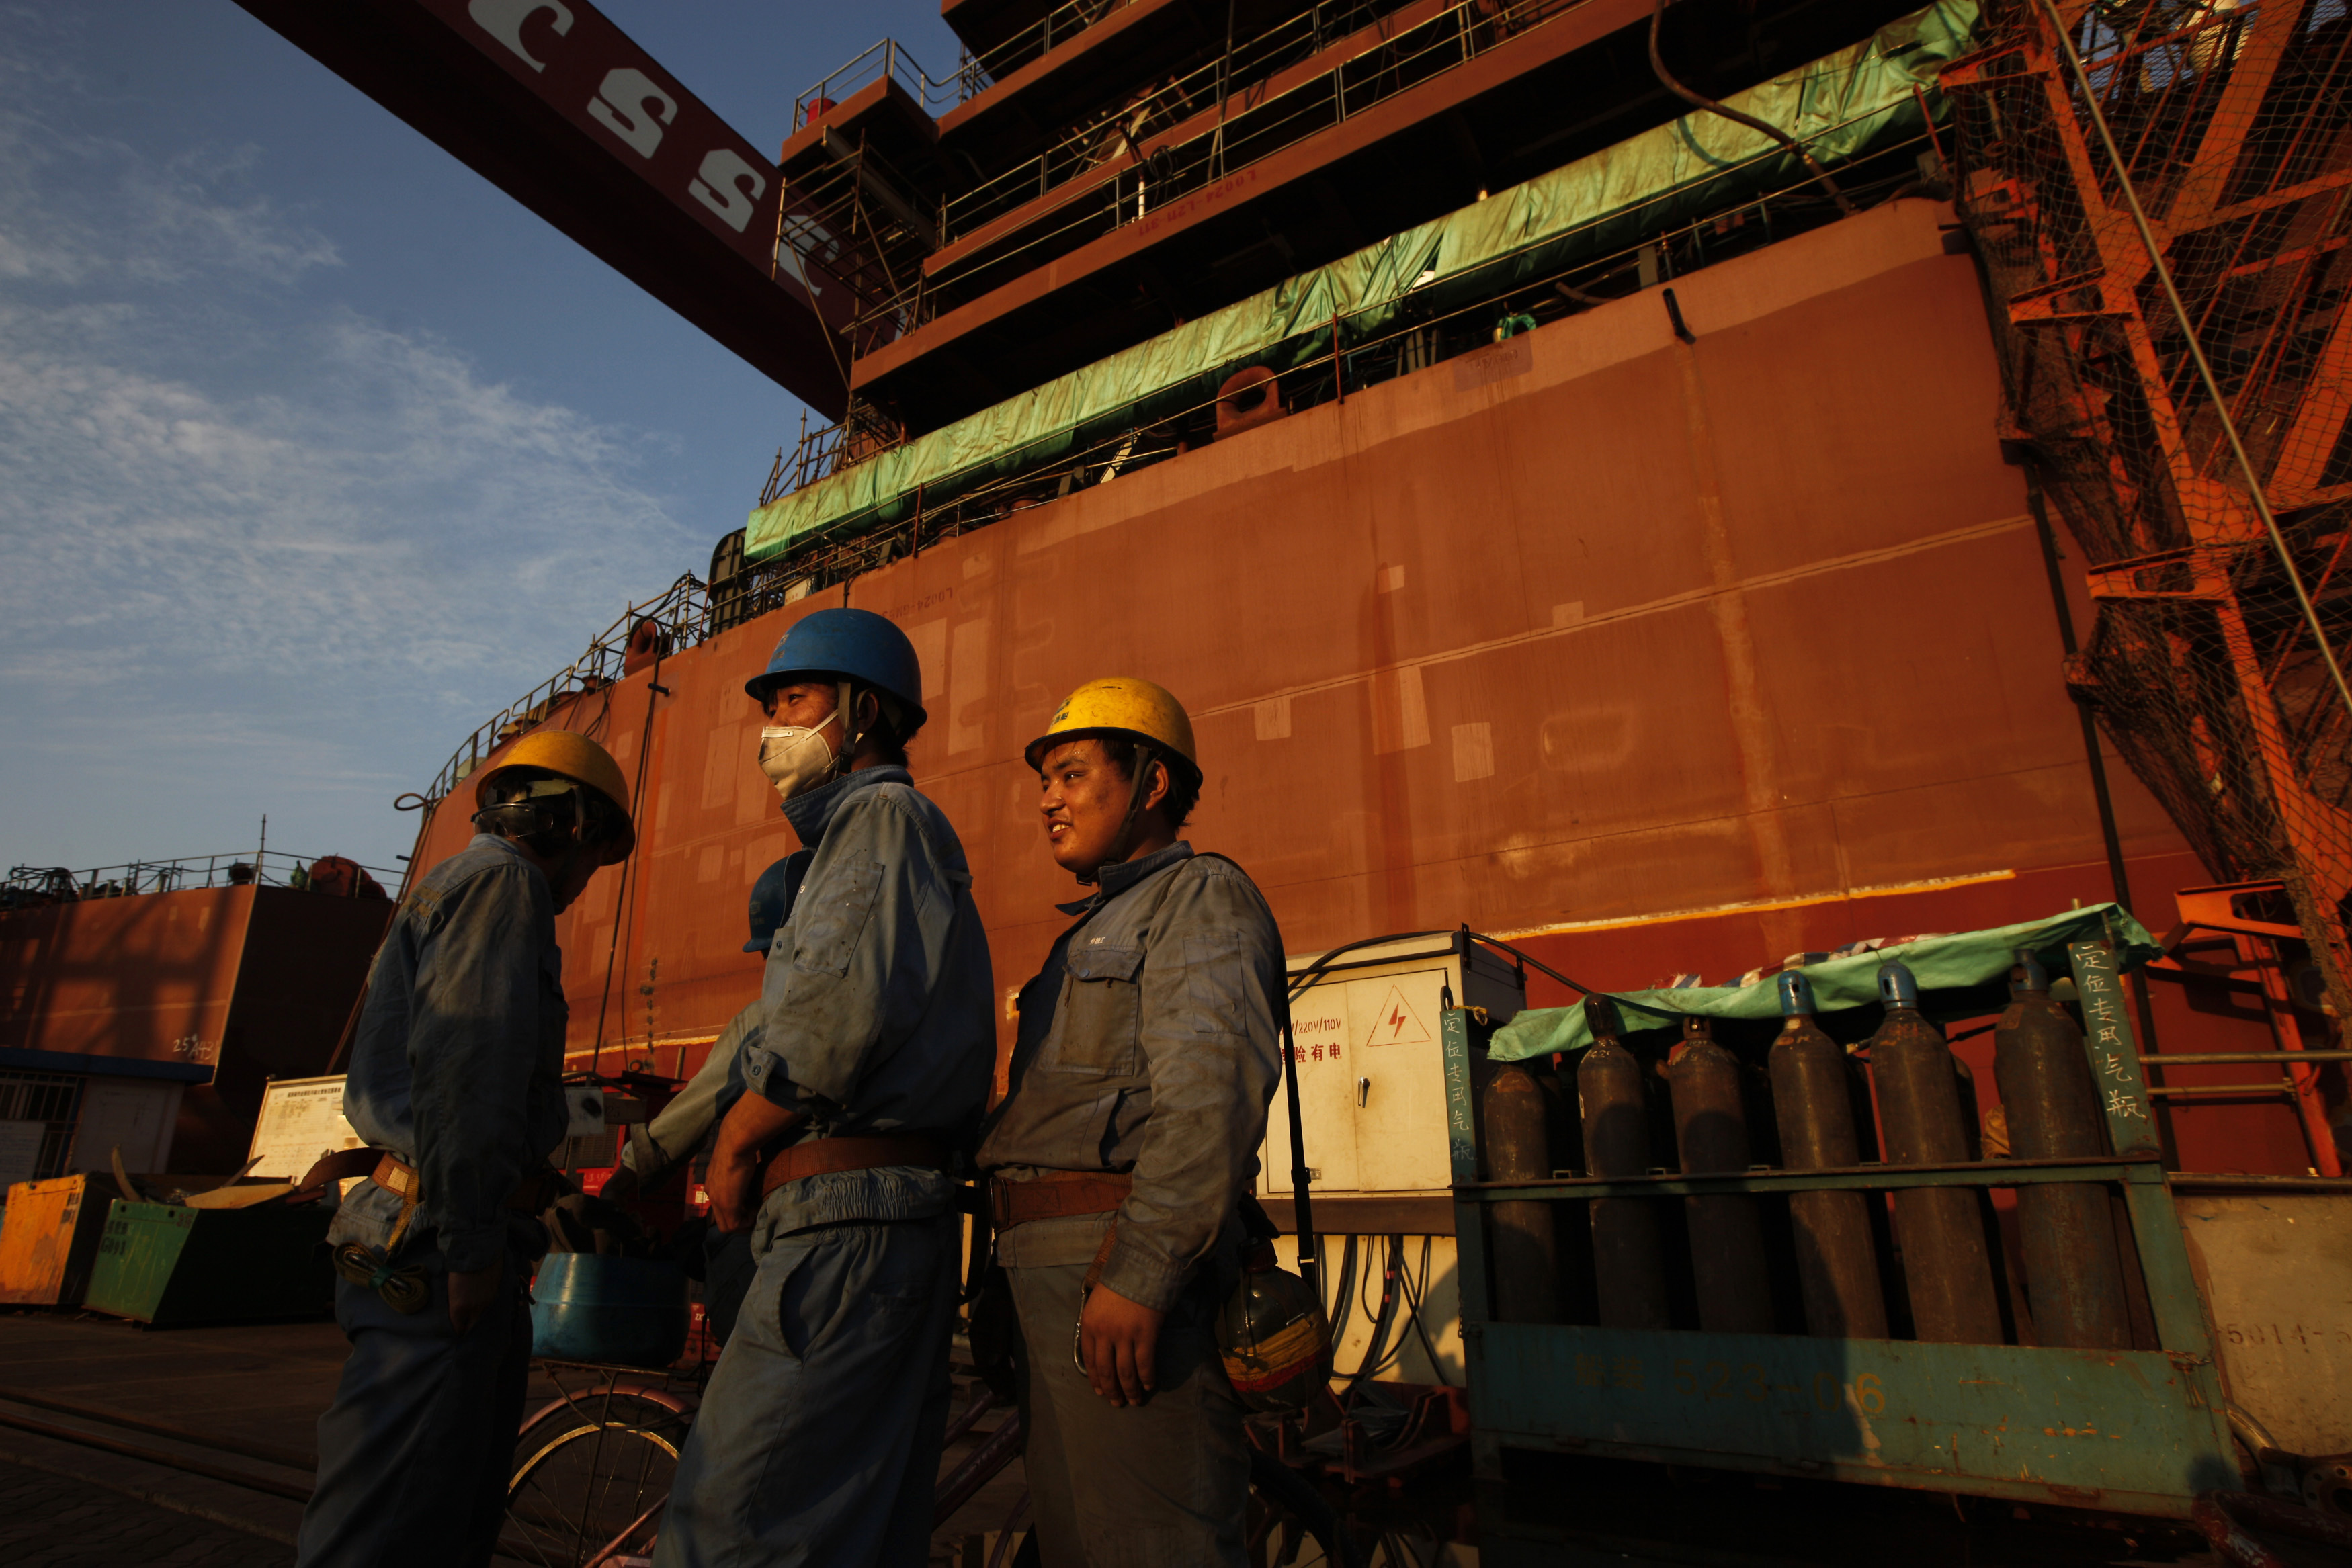 Employees stand in front of nearly completed ship at China State Shipbuilding Corporation (CSSC) Longxue shipbuilding, in the southern Chinese city of Guangzhou November 13, 2011. (© Siu Chiu / Reuters—REUTERS)